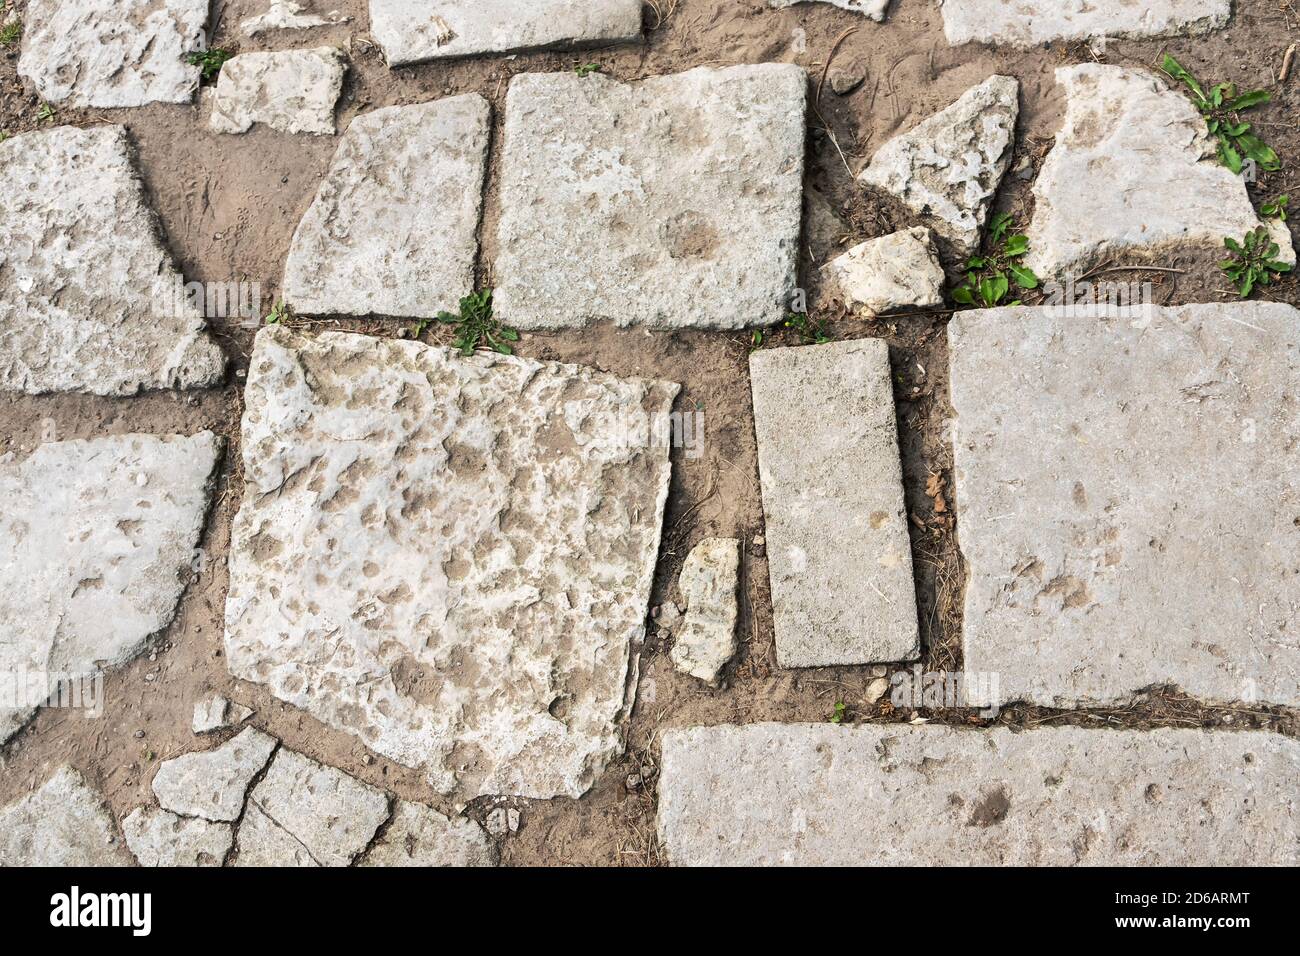 Stone paving of road, path paved with cobblestone Stock Photo